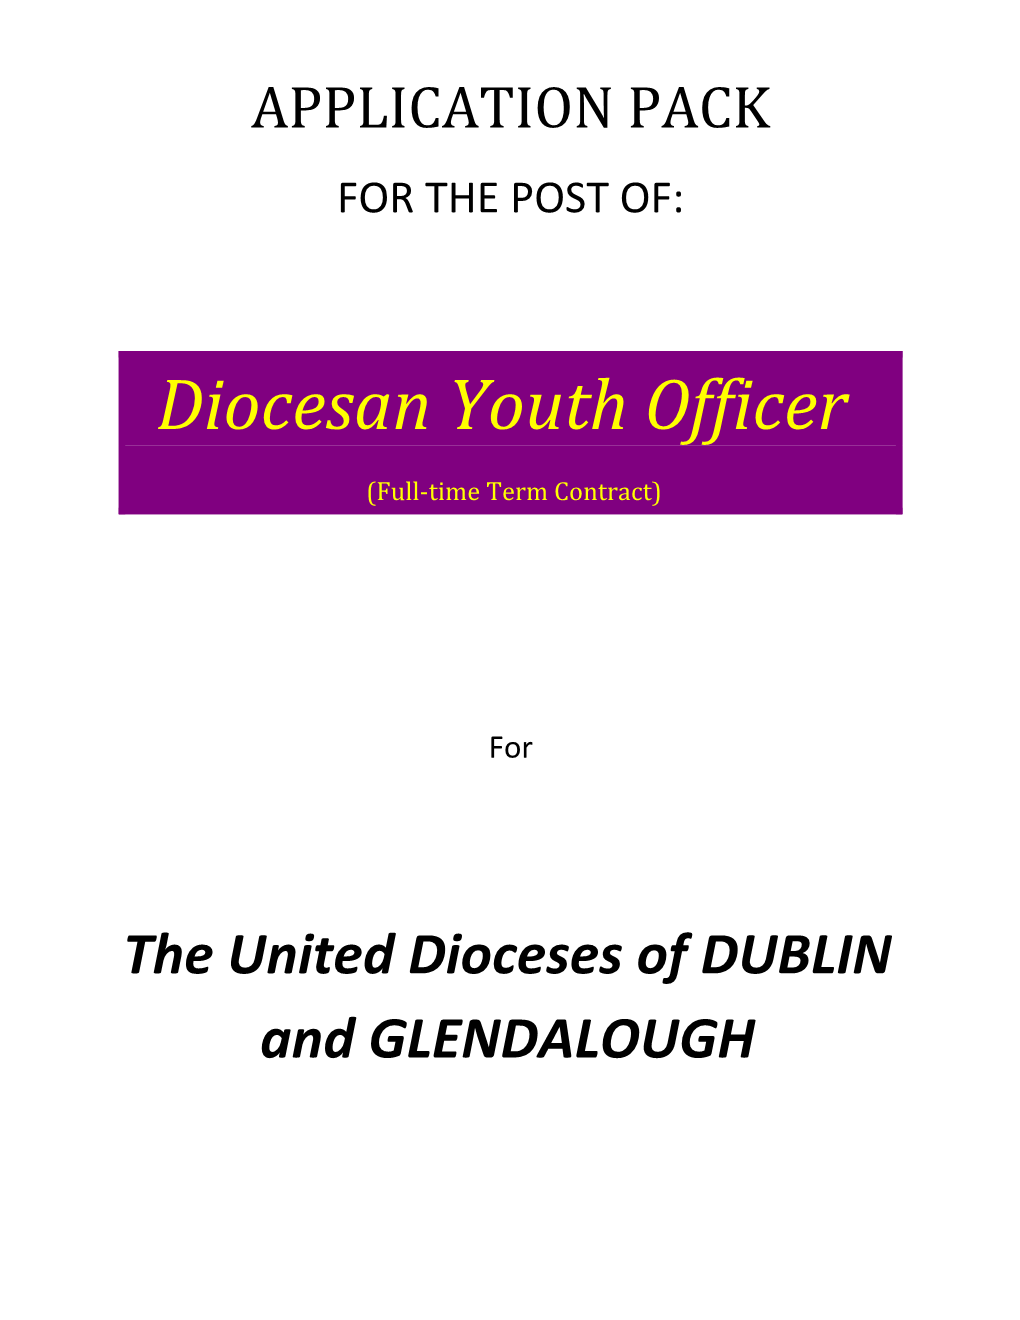 The United Dioceses of DUBLIN and GLENDALOUGH